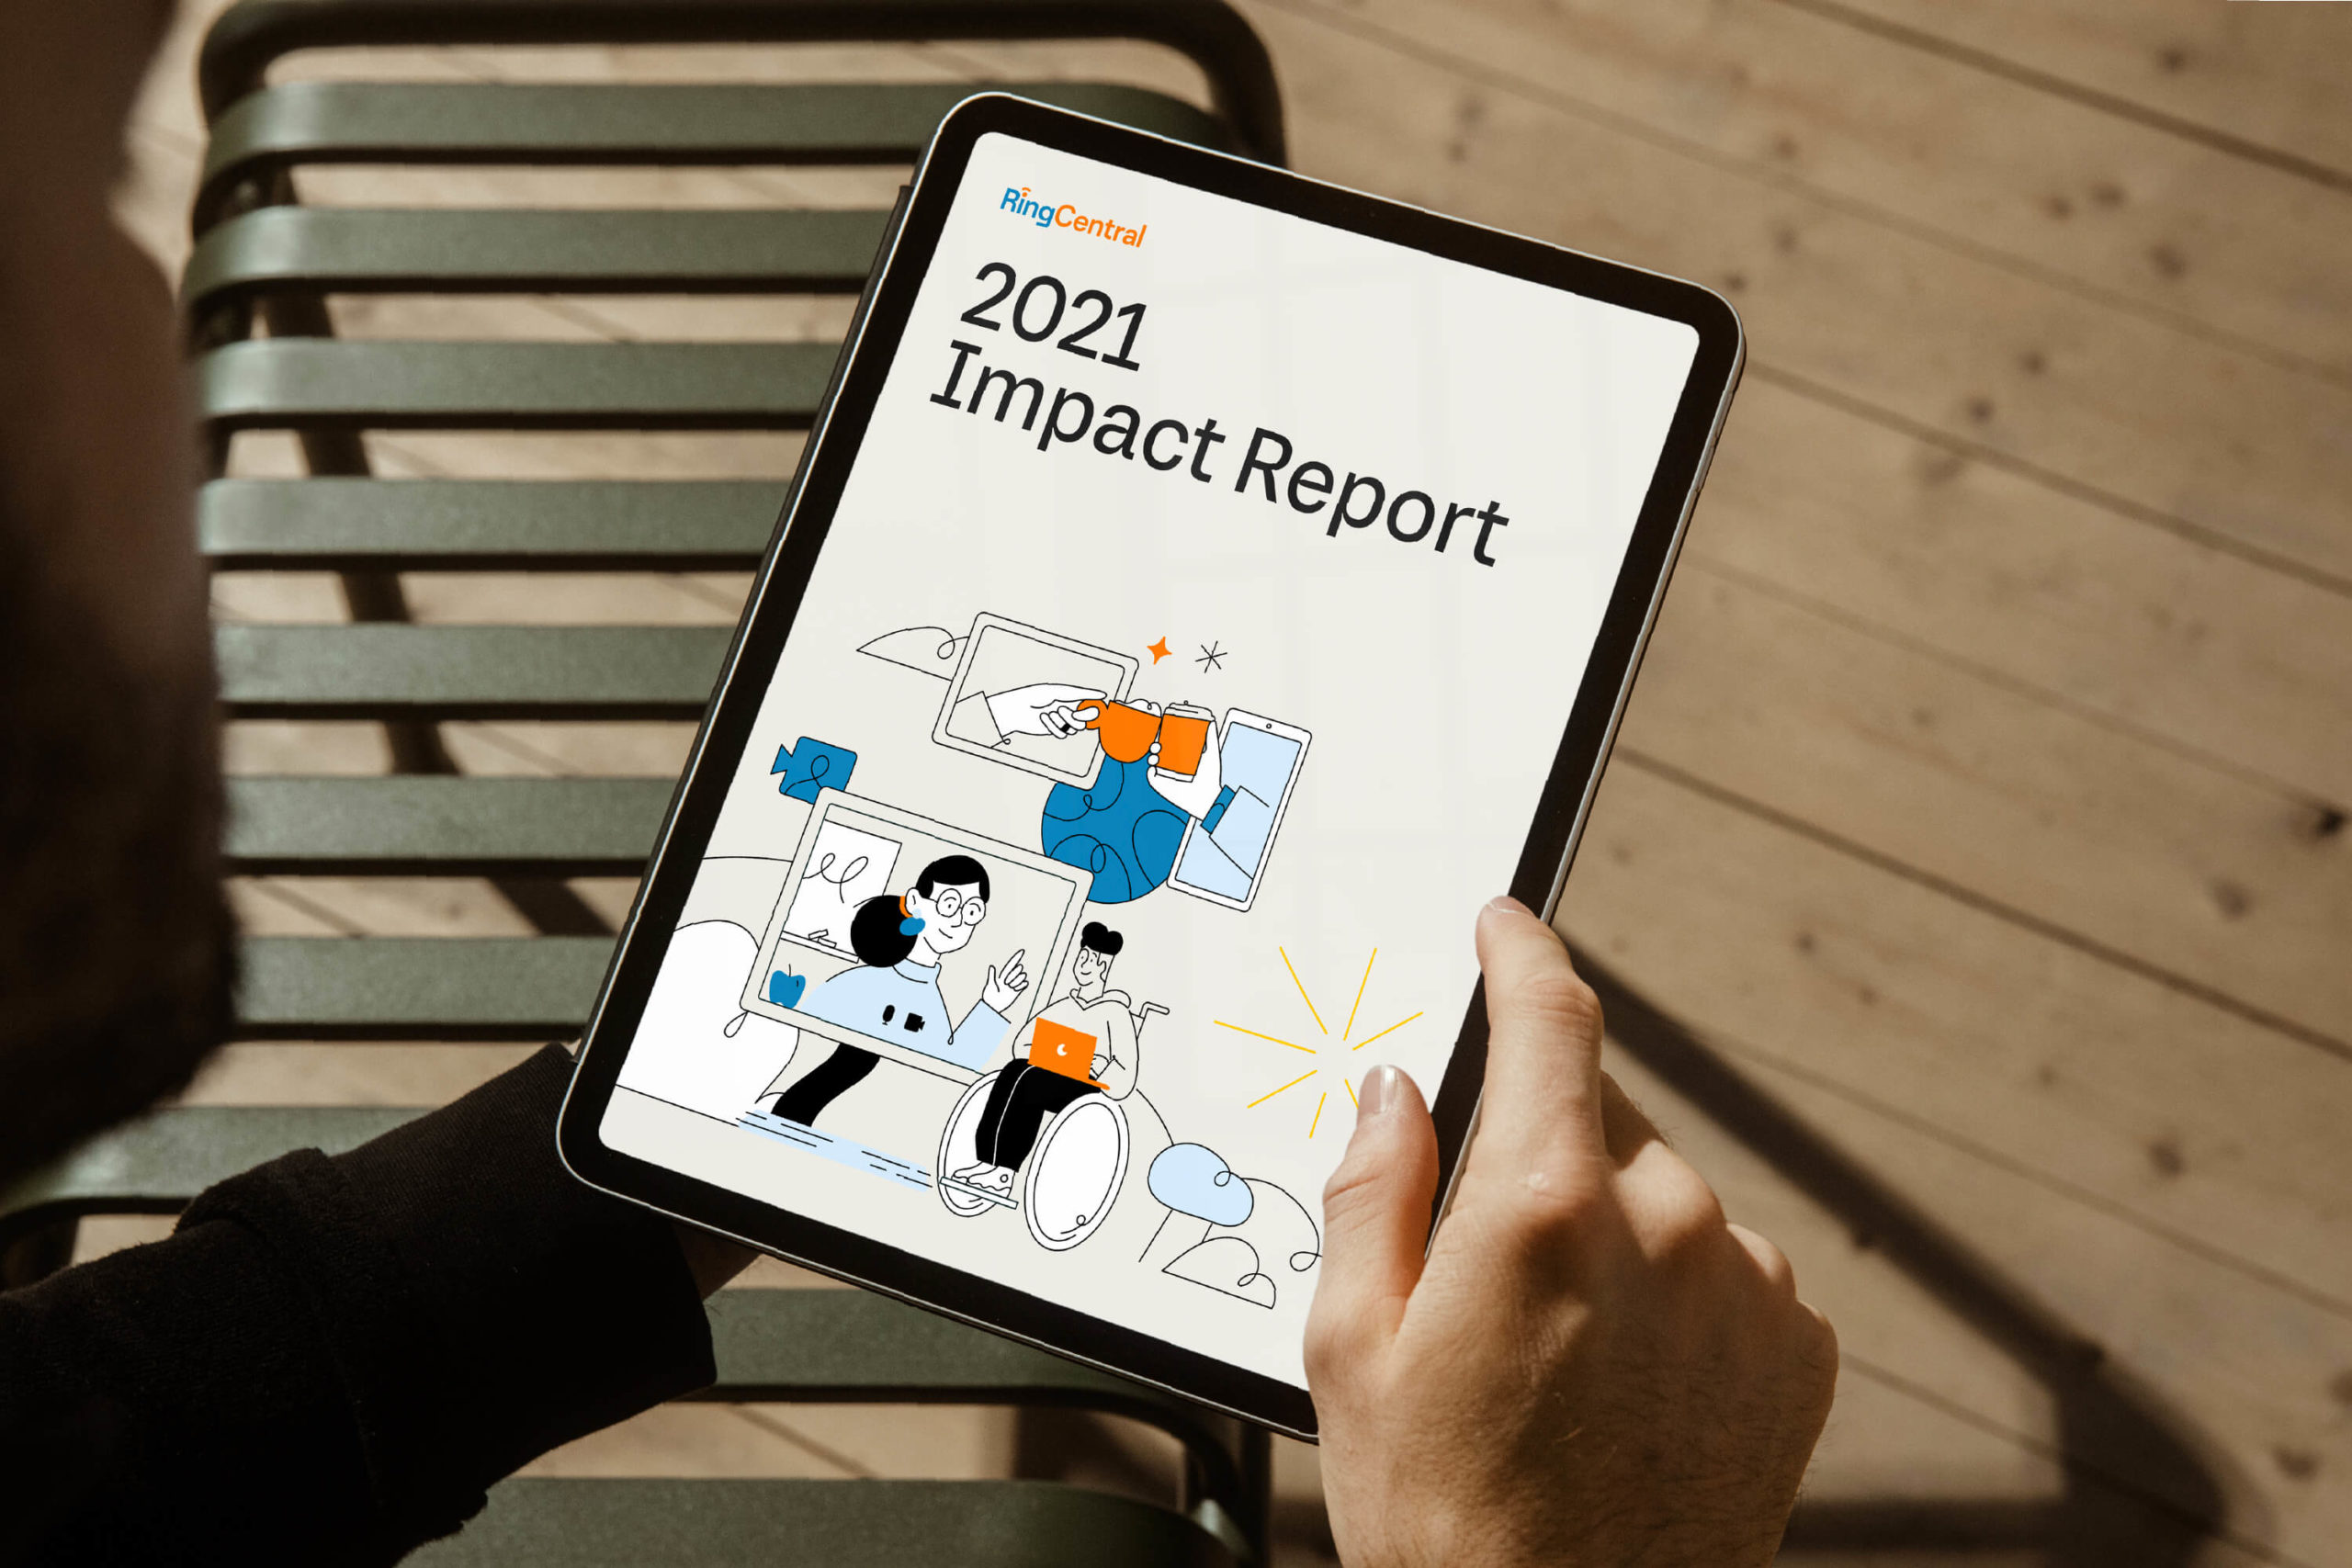 RingCentral 2021 Impact Report